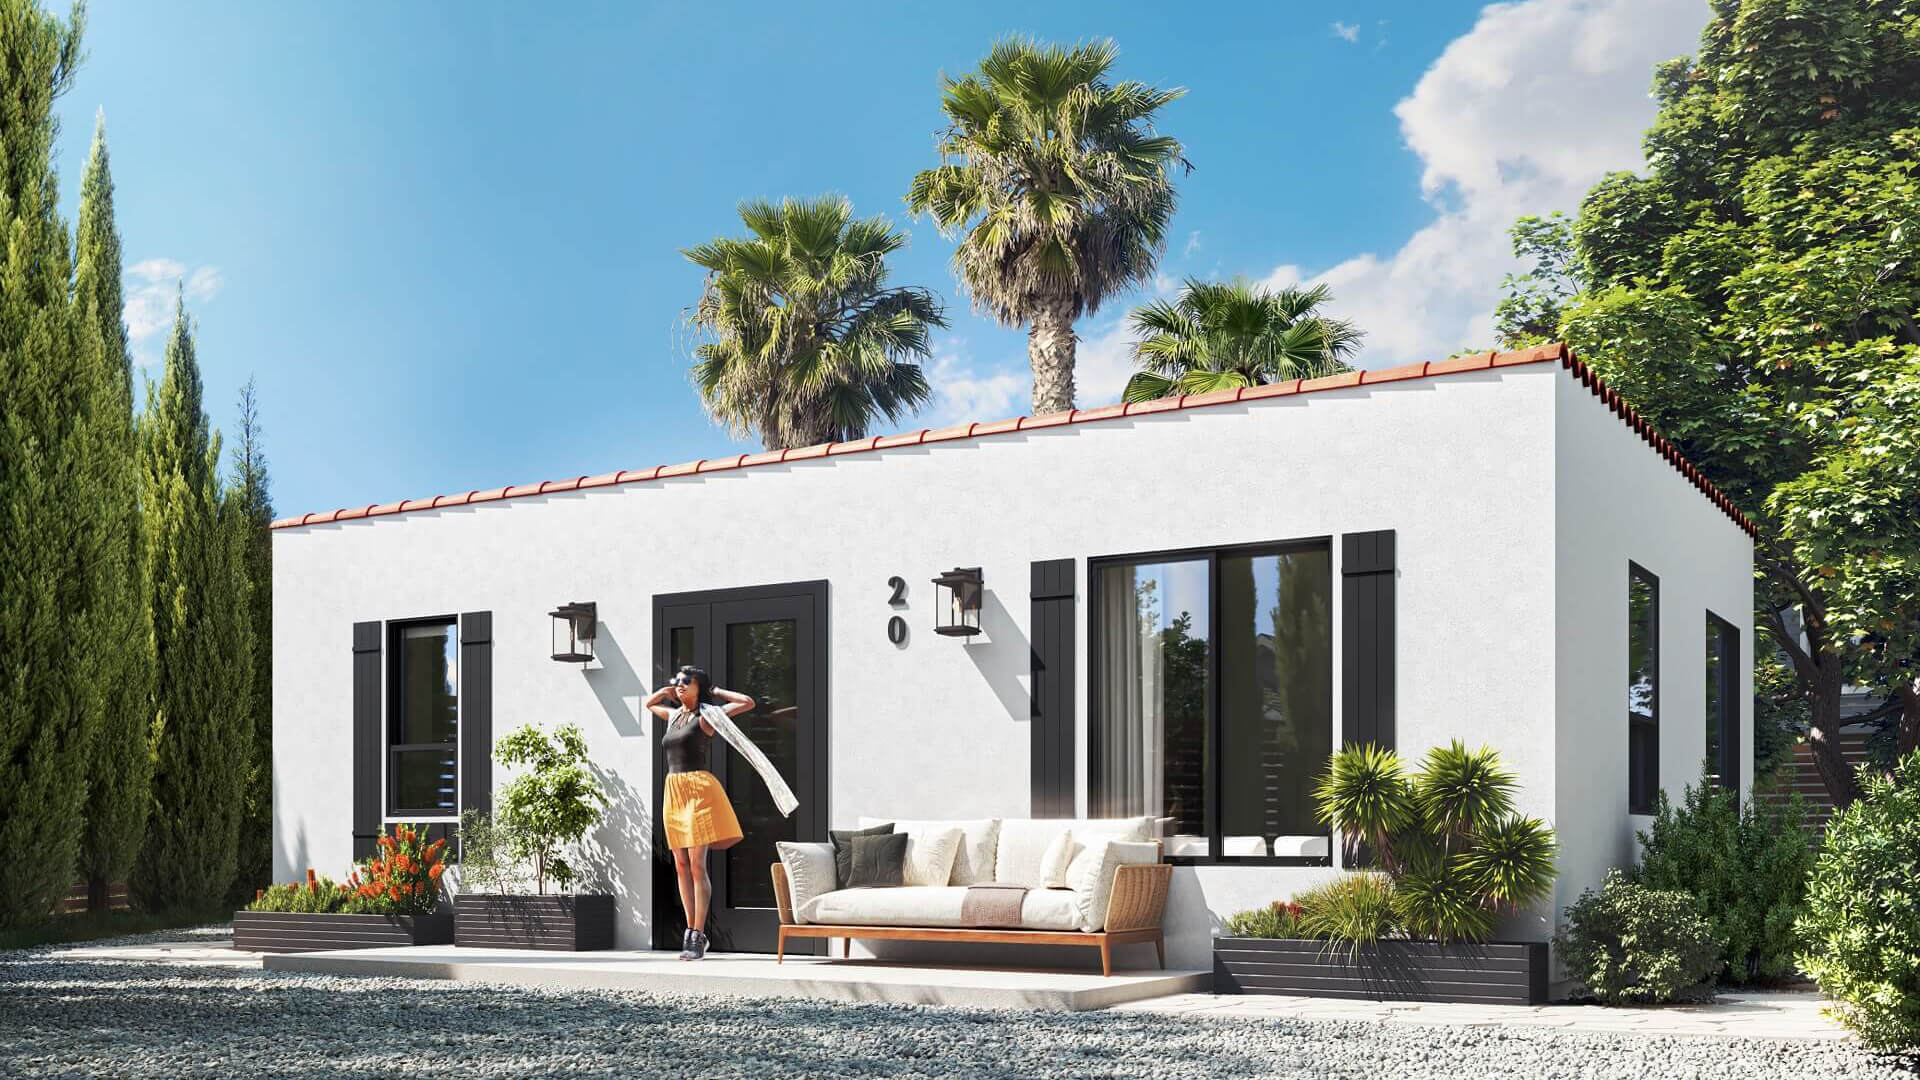 ADU 3D Rendering for a Spanish-style Bungalow in Los Angeles